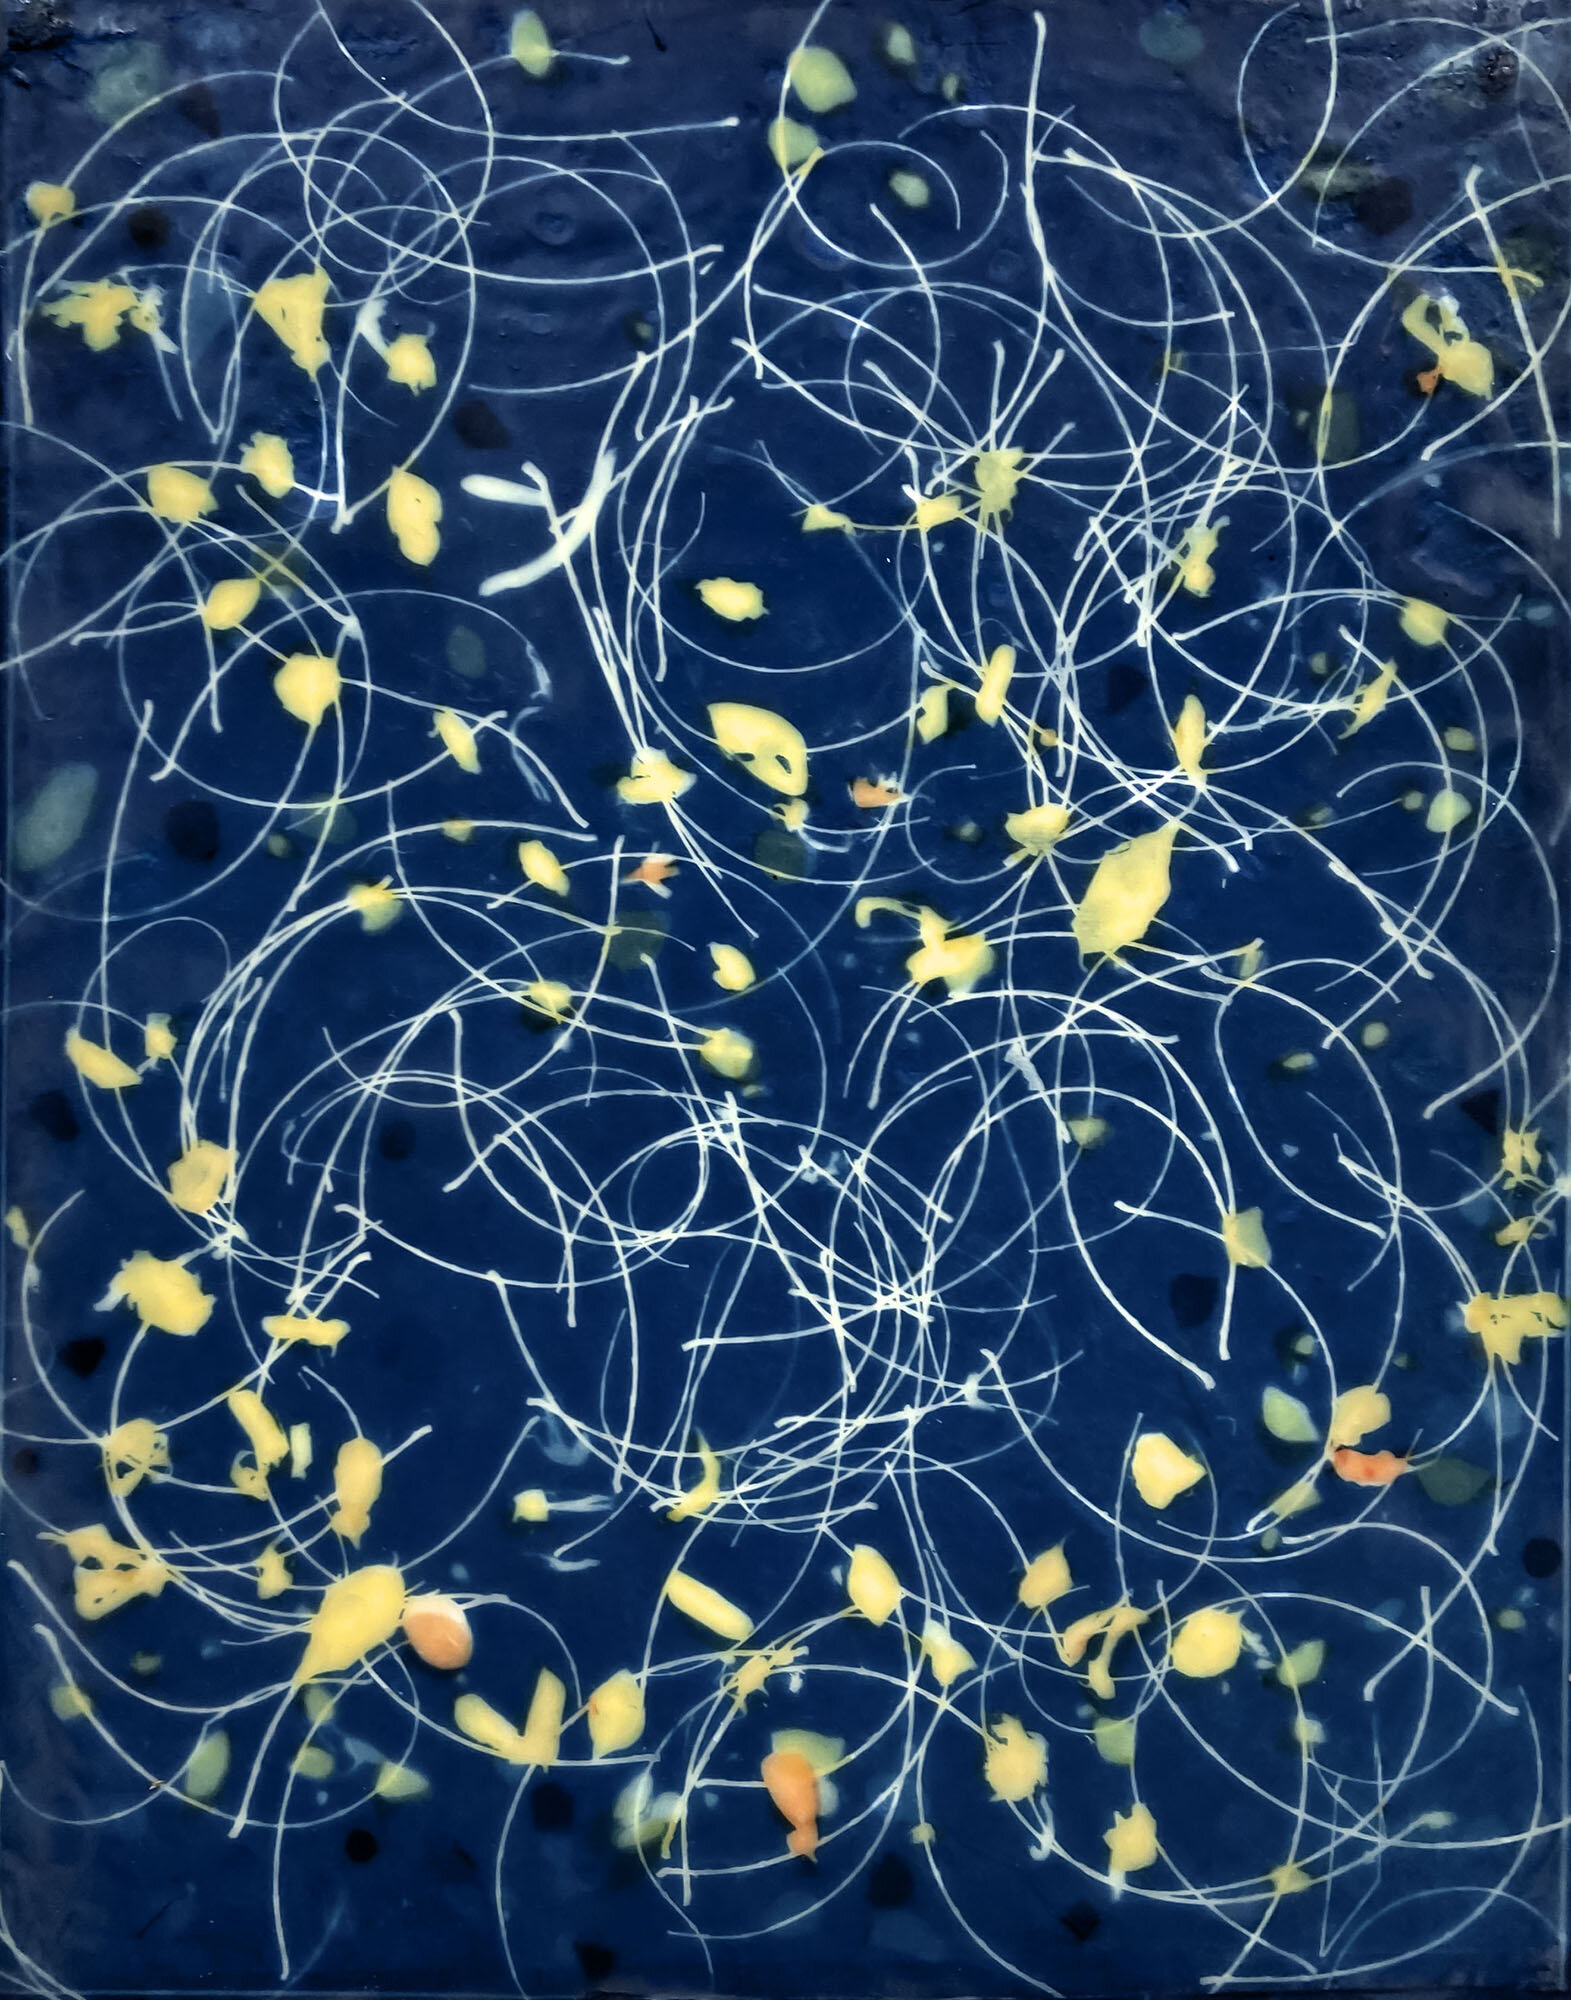   Tobago Tides III,  2020  Cyanotype on Japanese rice paper, colored Japanese rice papers, wax, encaustic board   11" x 14" 